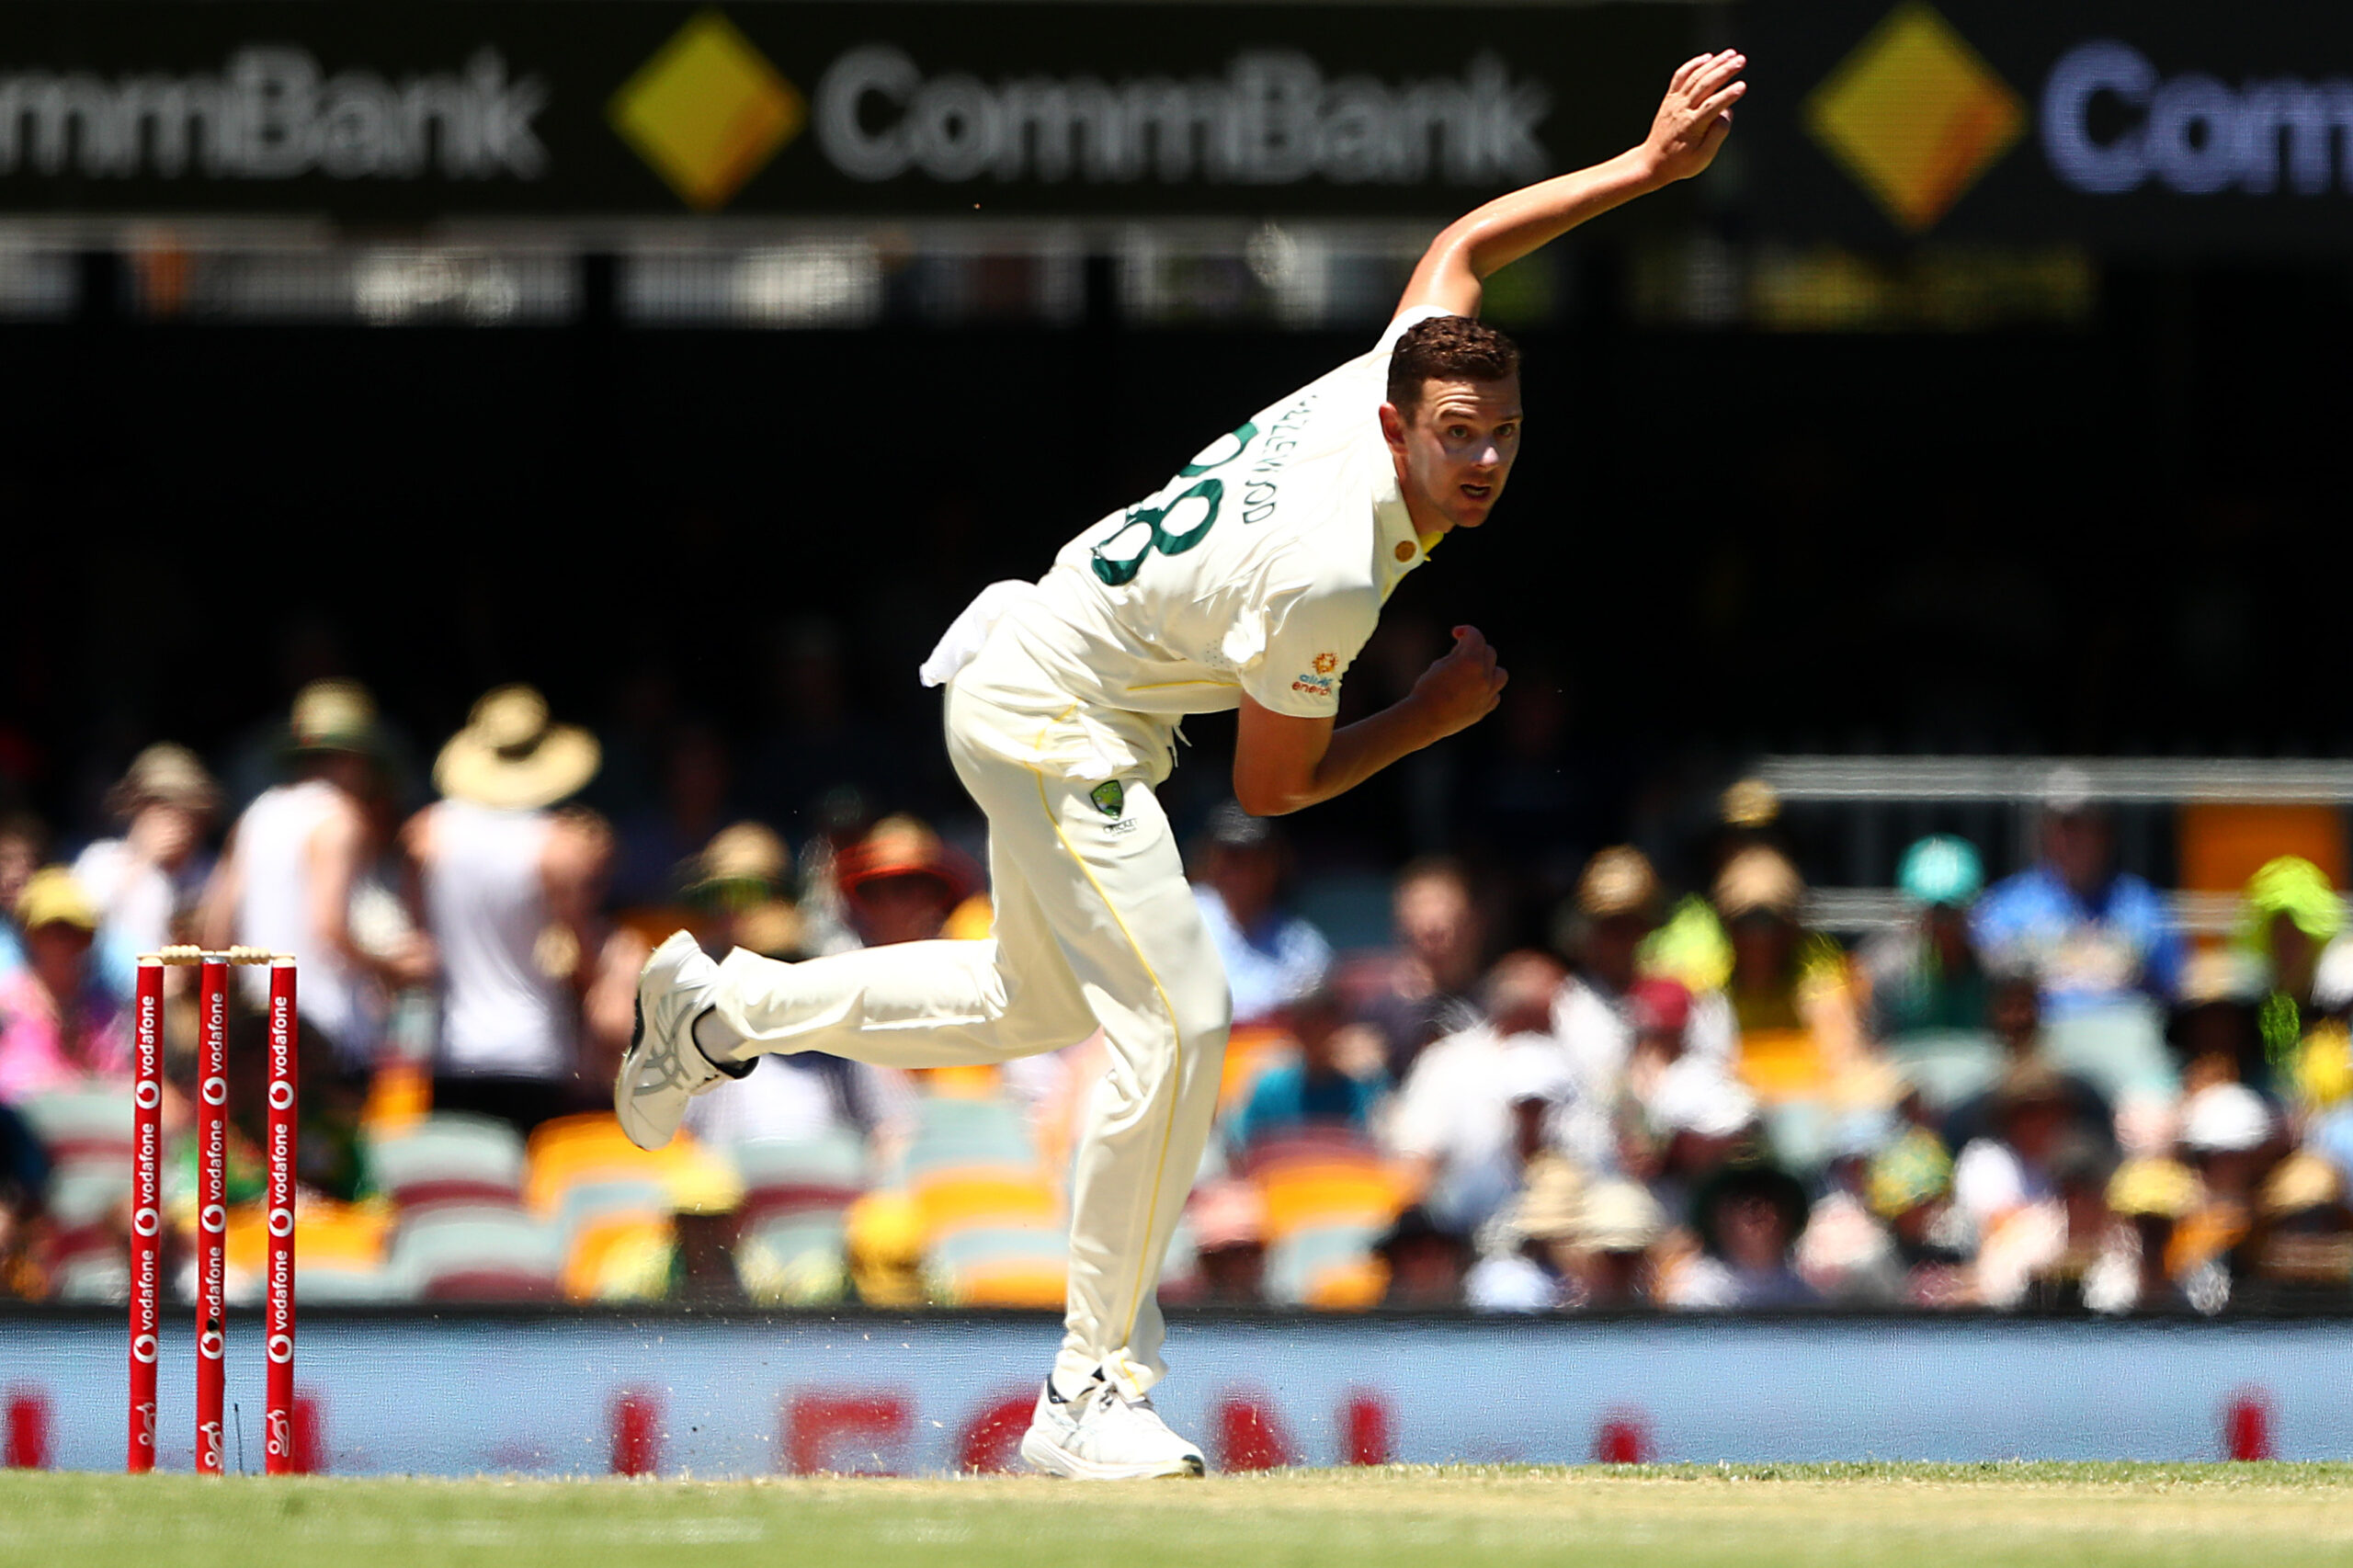  Ashes 2021: Josh Hazlewood Ruled Out Of The 2nd Test Due To A Side Strain